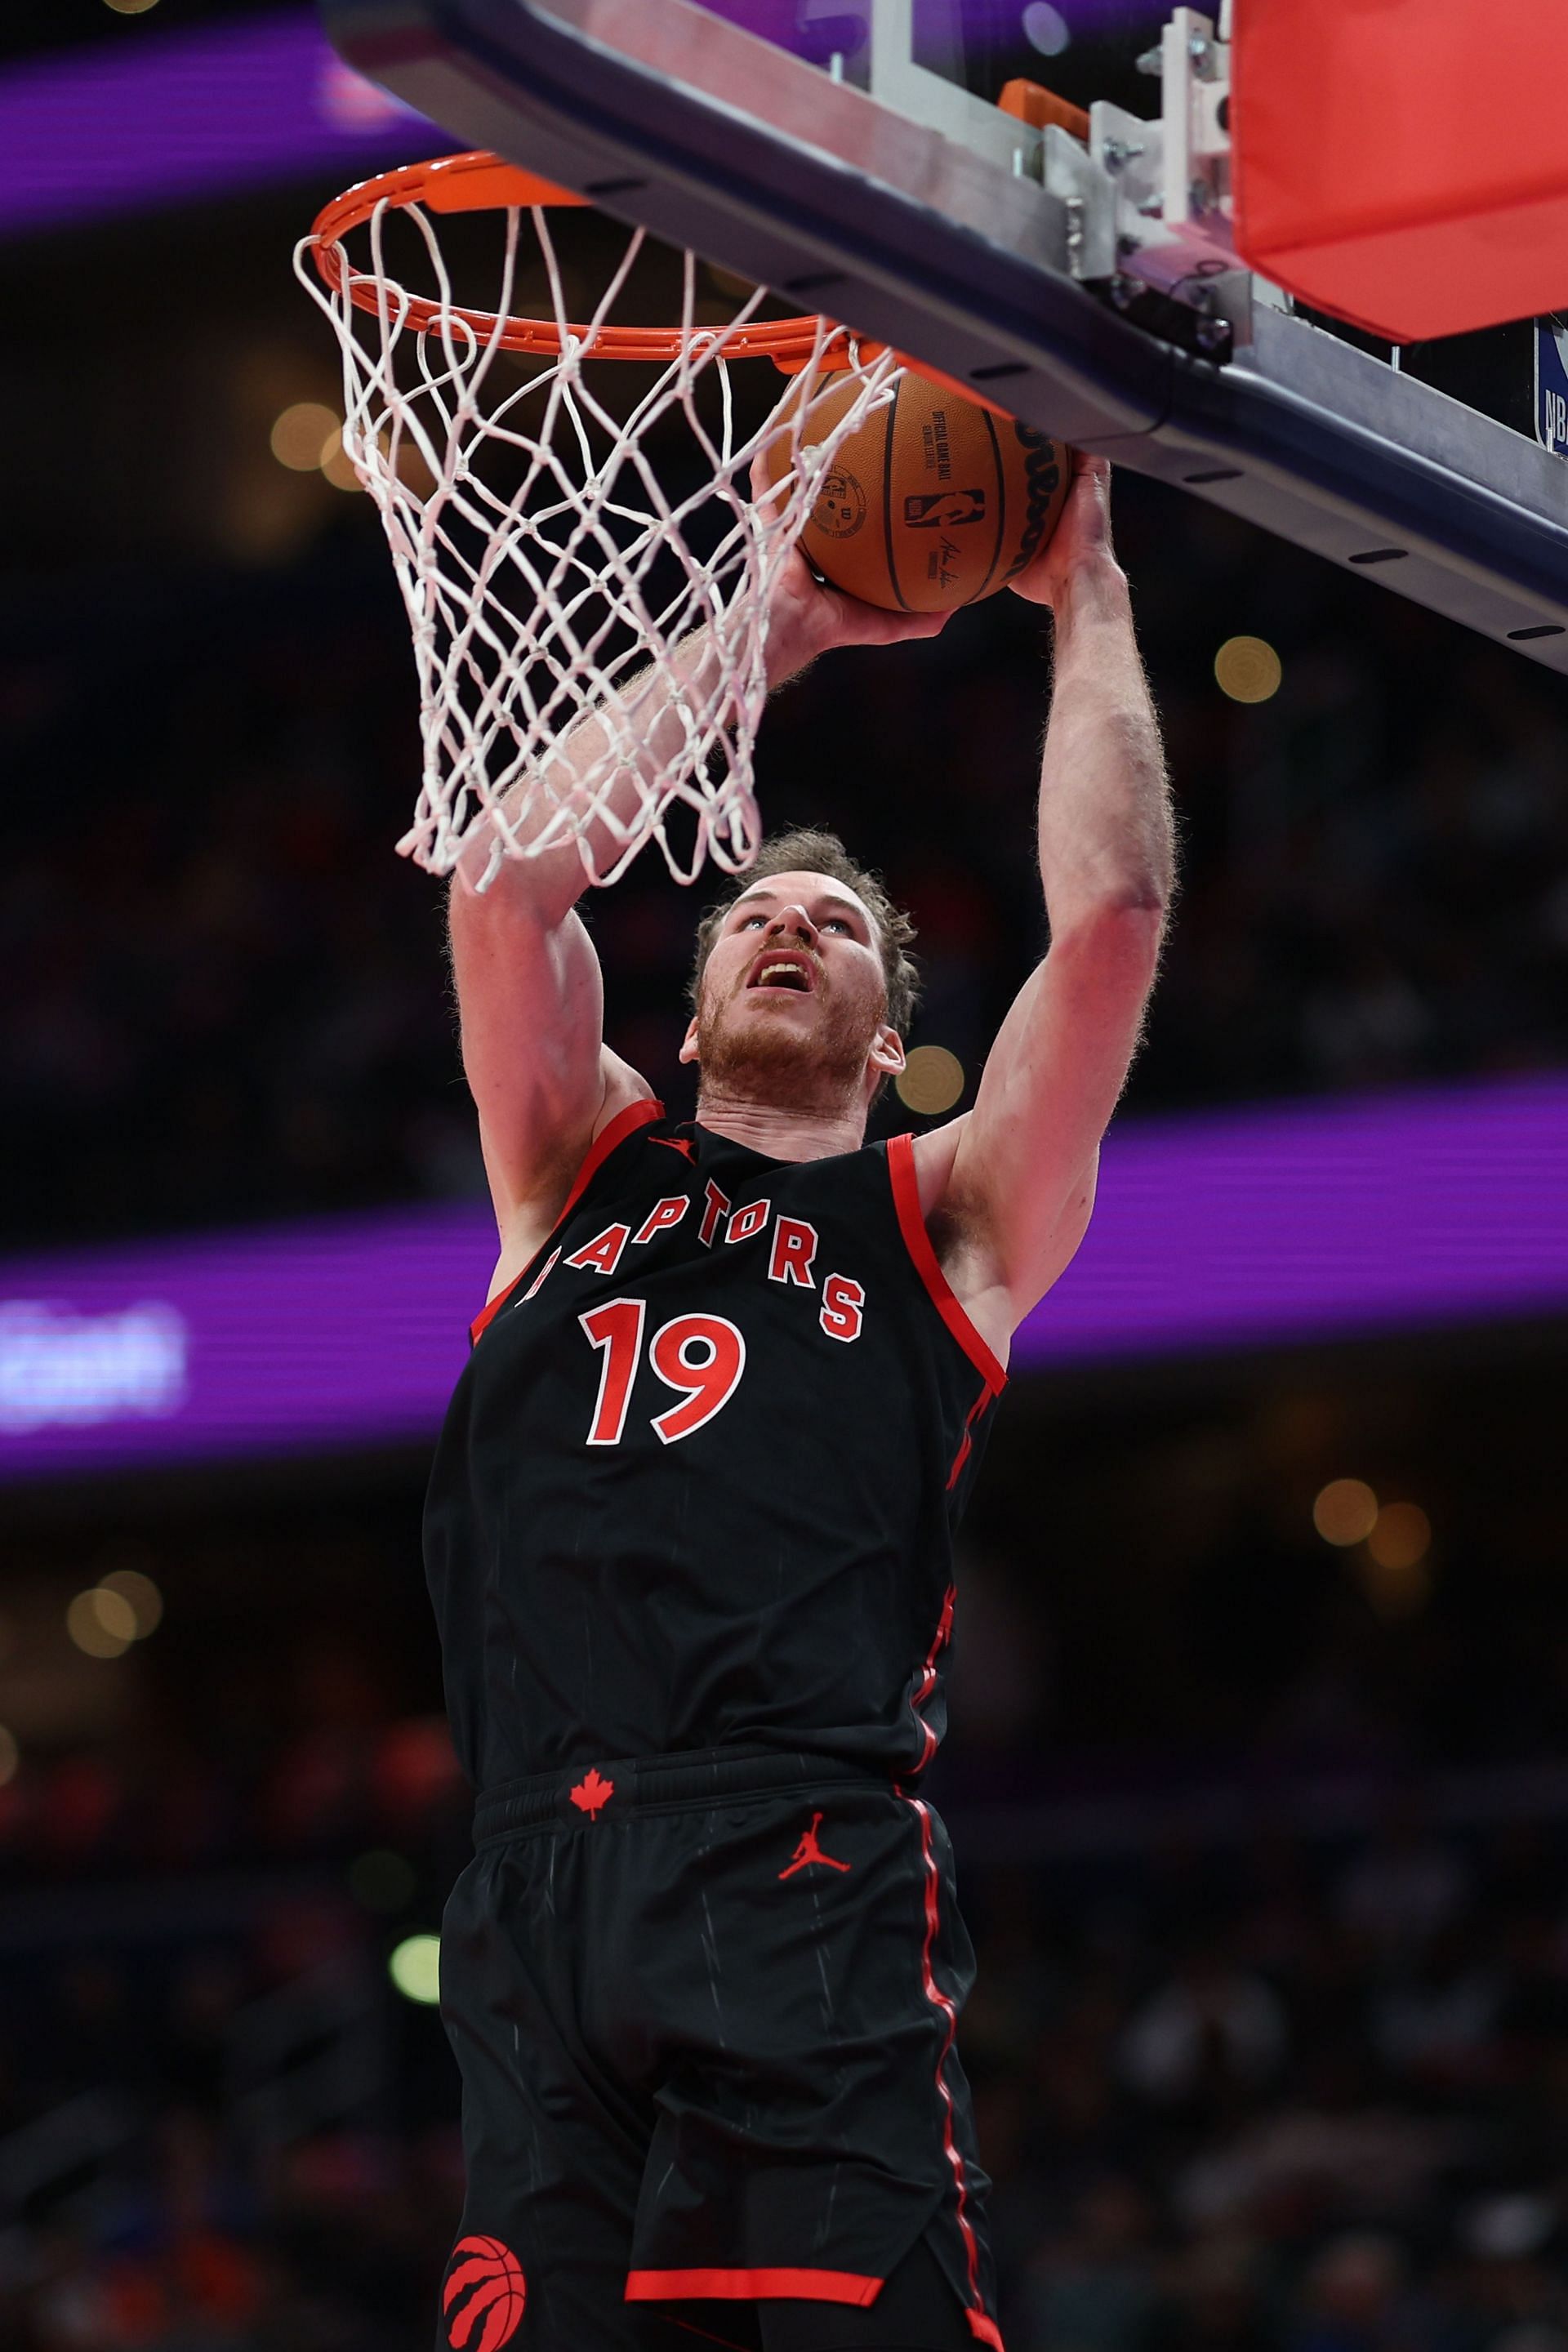 Jakob Poeltl putting the ball in the Basket